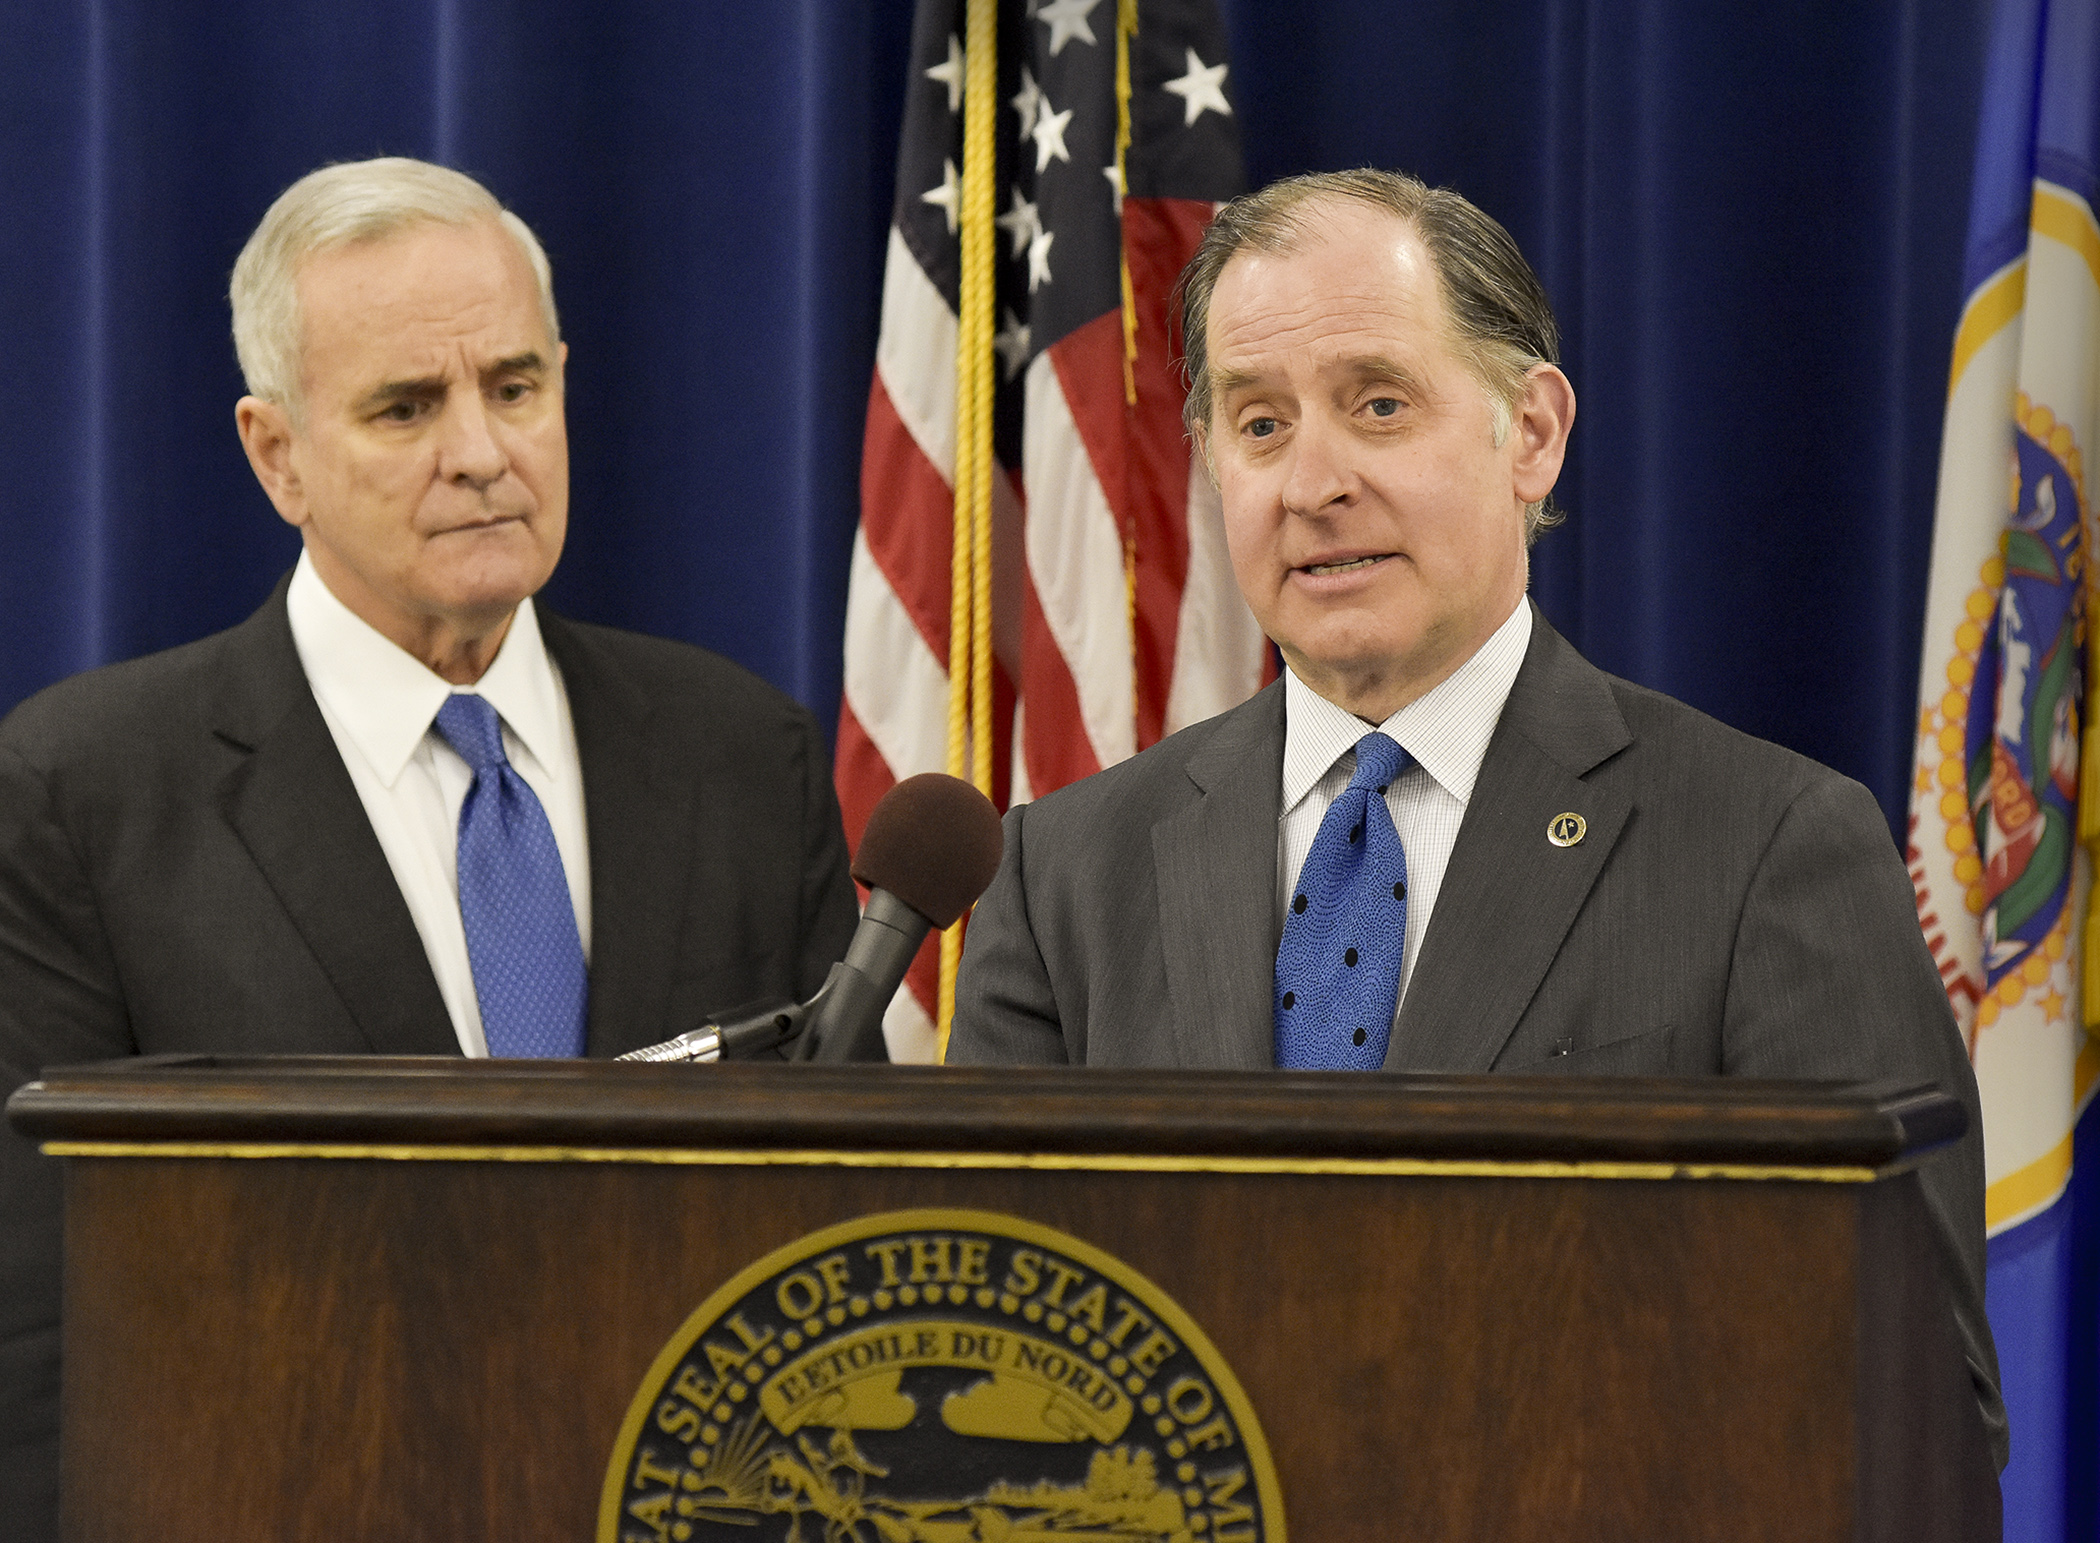 MnDOT Commissioner Charlie Zelle, right, speaks to the media with Gov. Mark Dayton during an April 29 transportation press conference. Photo by Andrew VonBank